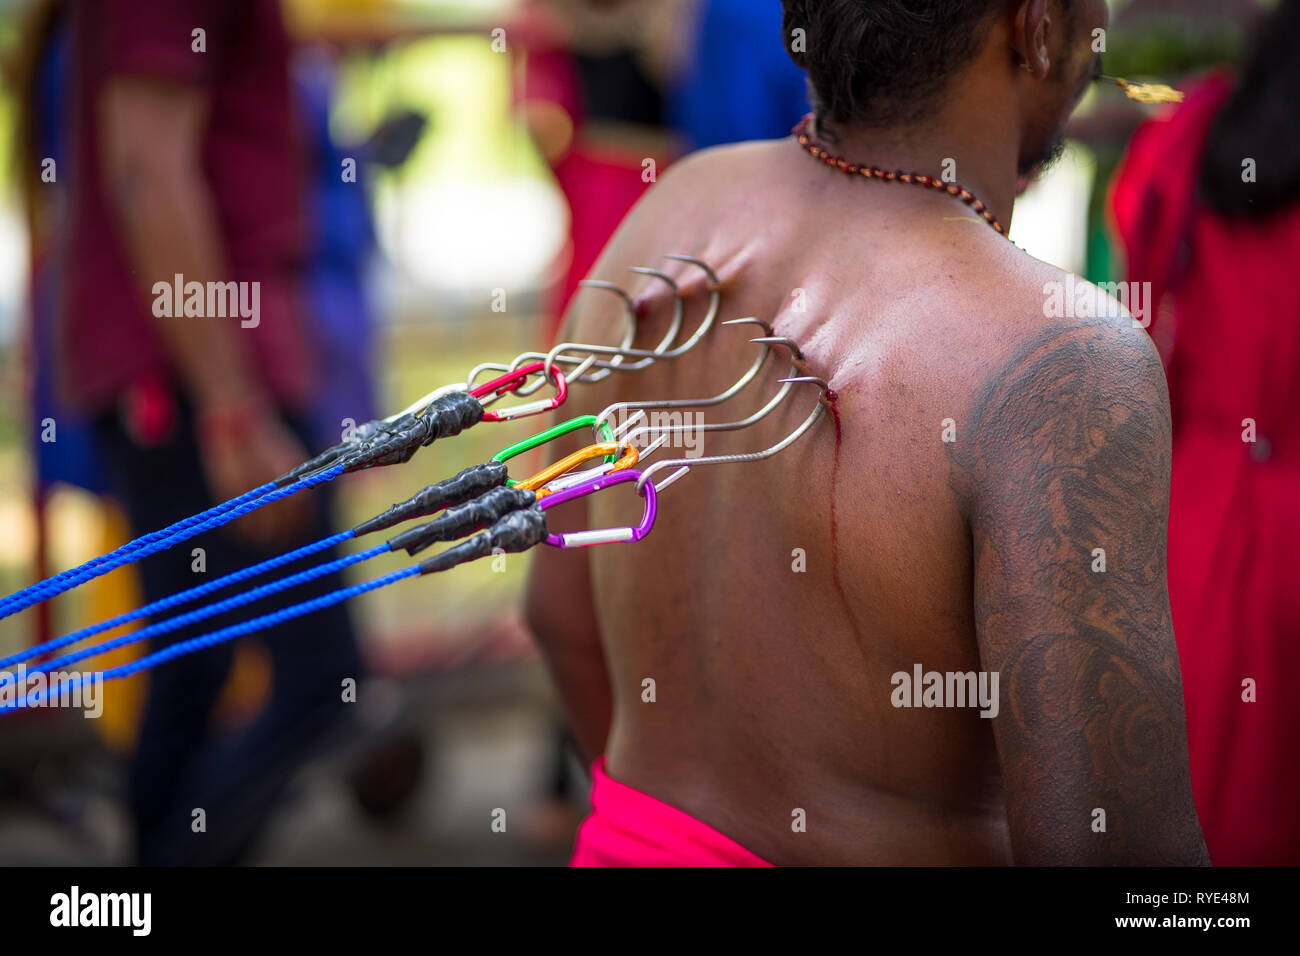 Ropes and large hooks pierced into devotee's back, closeup detail - Thaipusam festival - Singapore Stock Photo